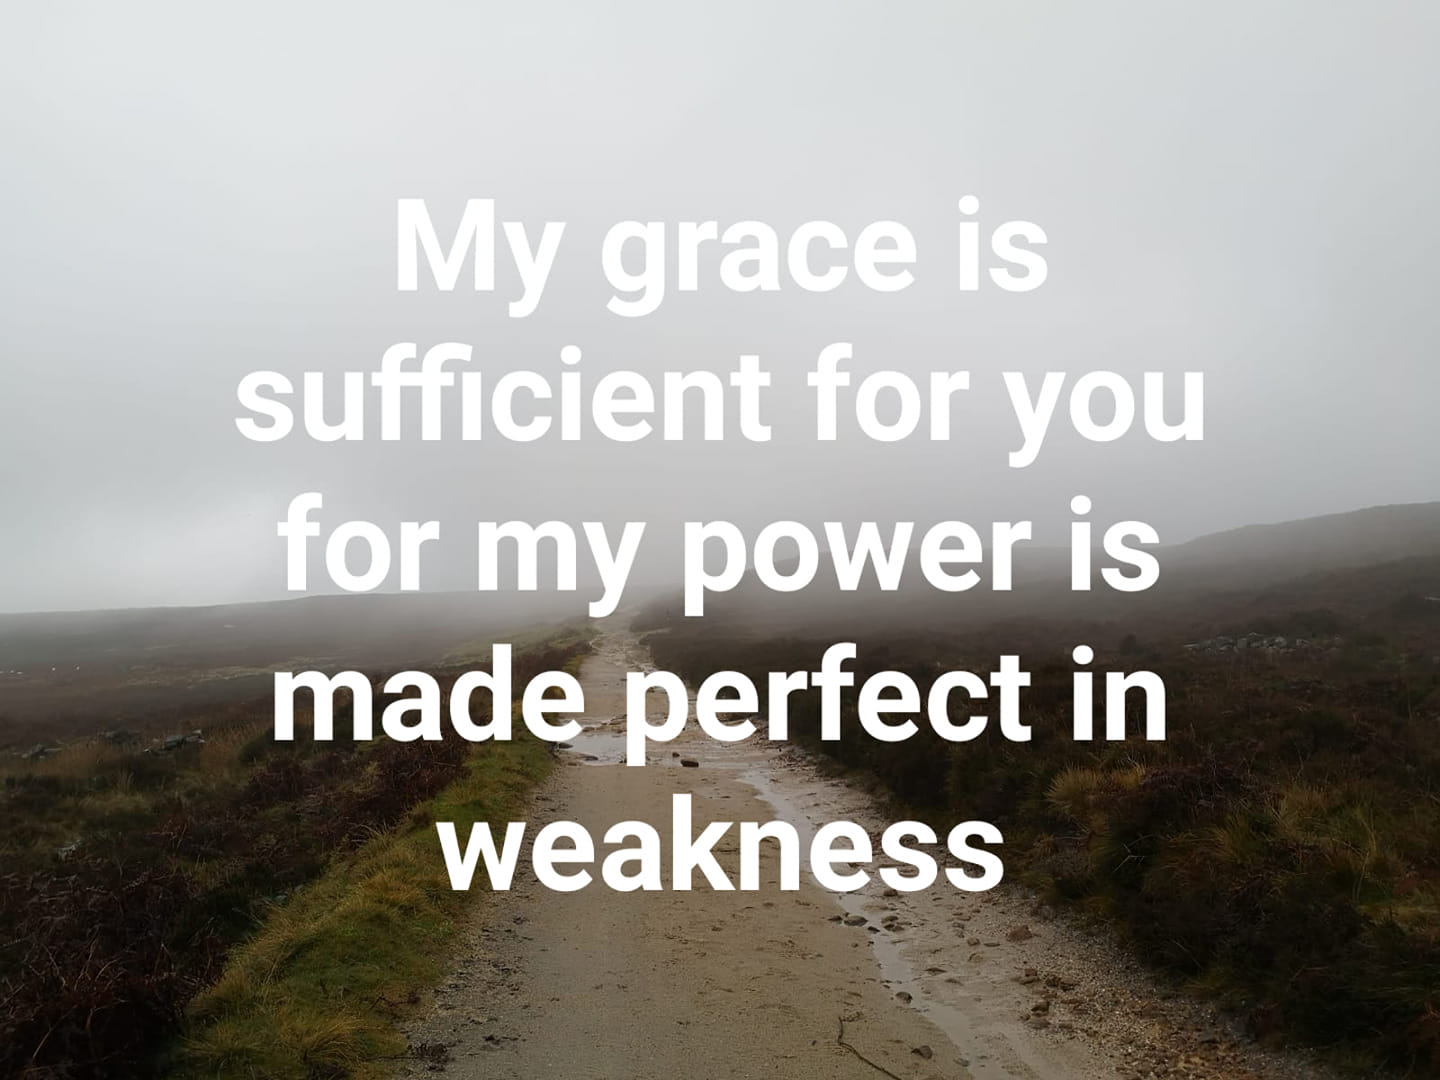 My grace is sufficient for you